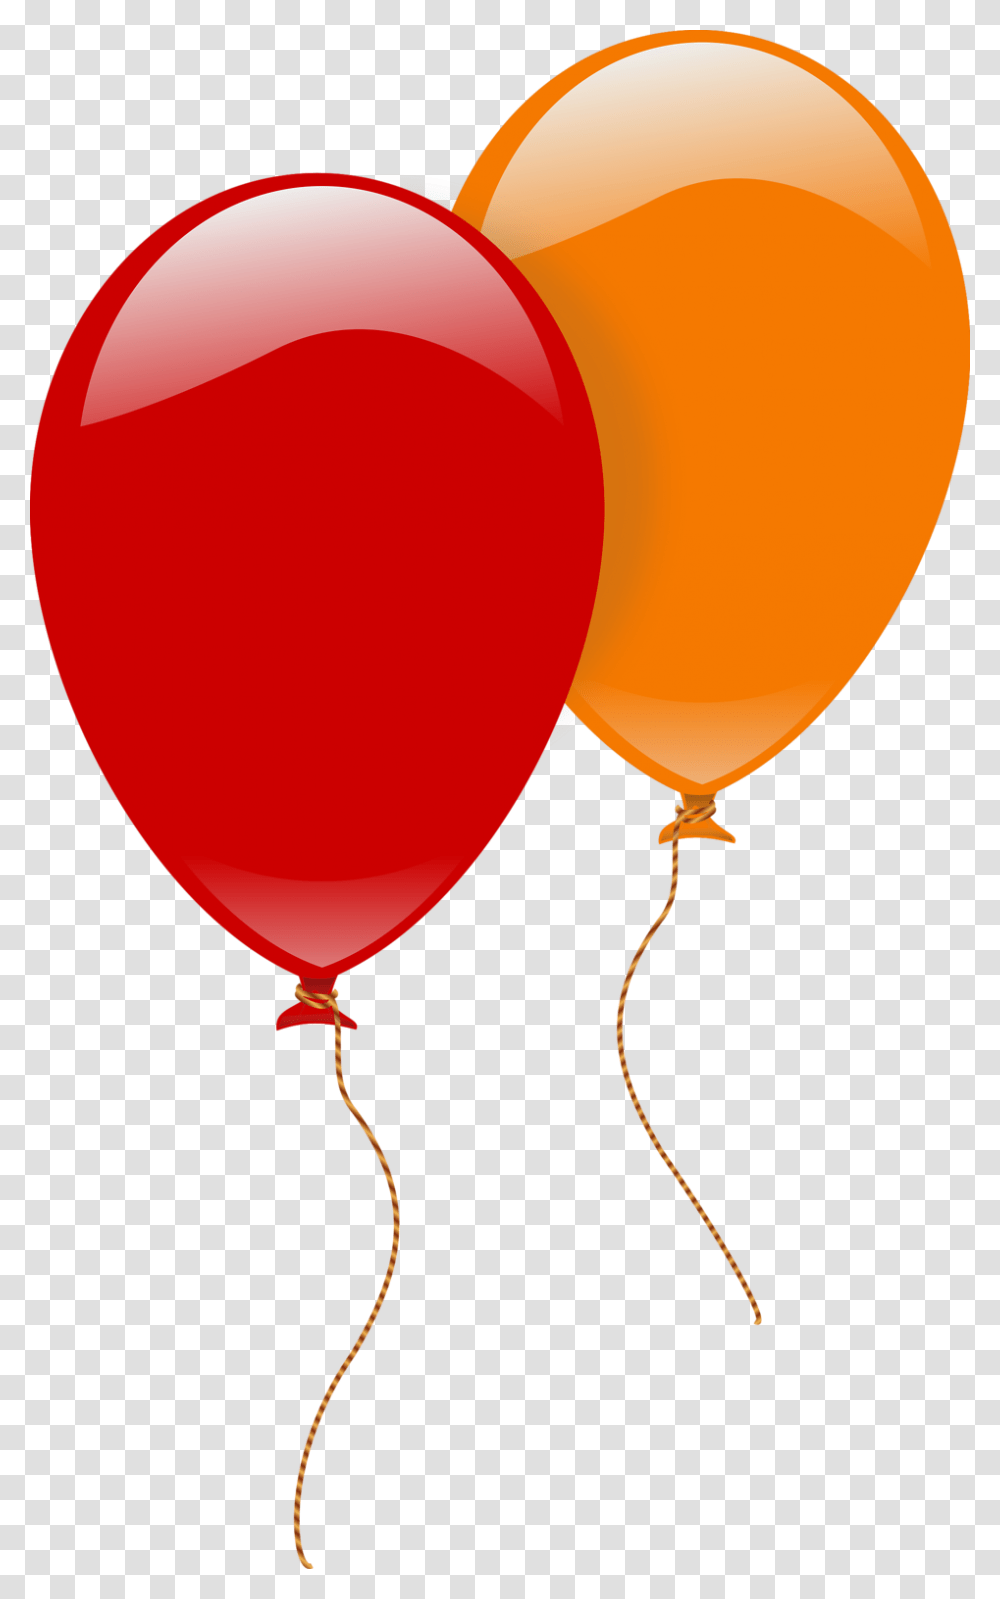 Free Stock Photo Illustration Of A Red And An Orange Balloon Transparent Png